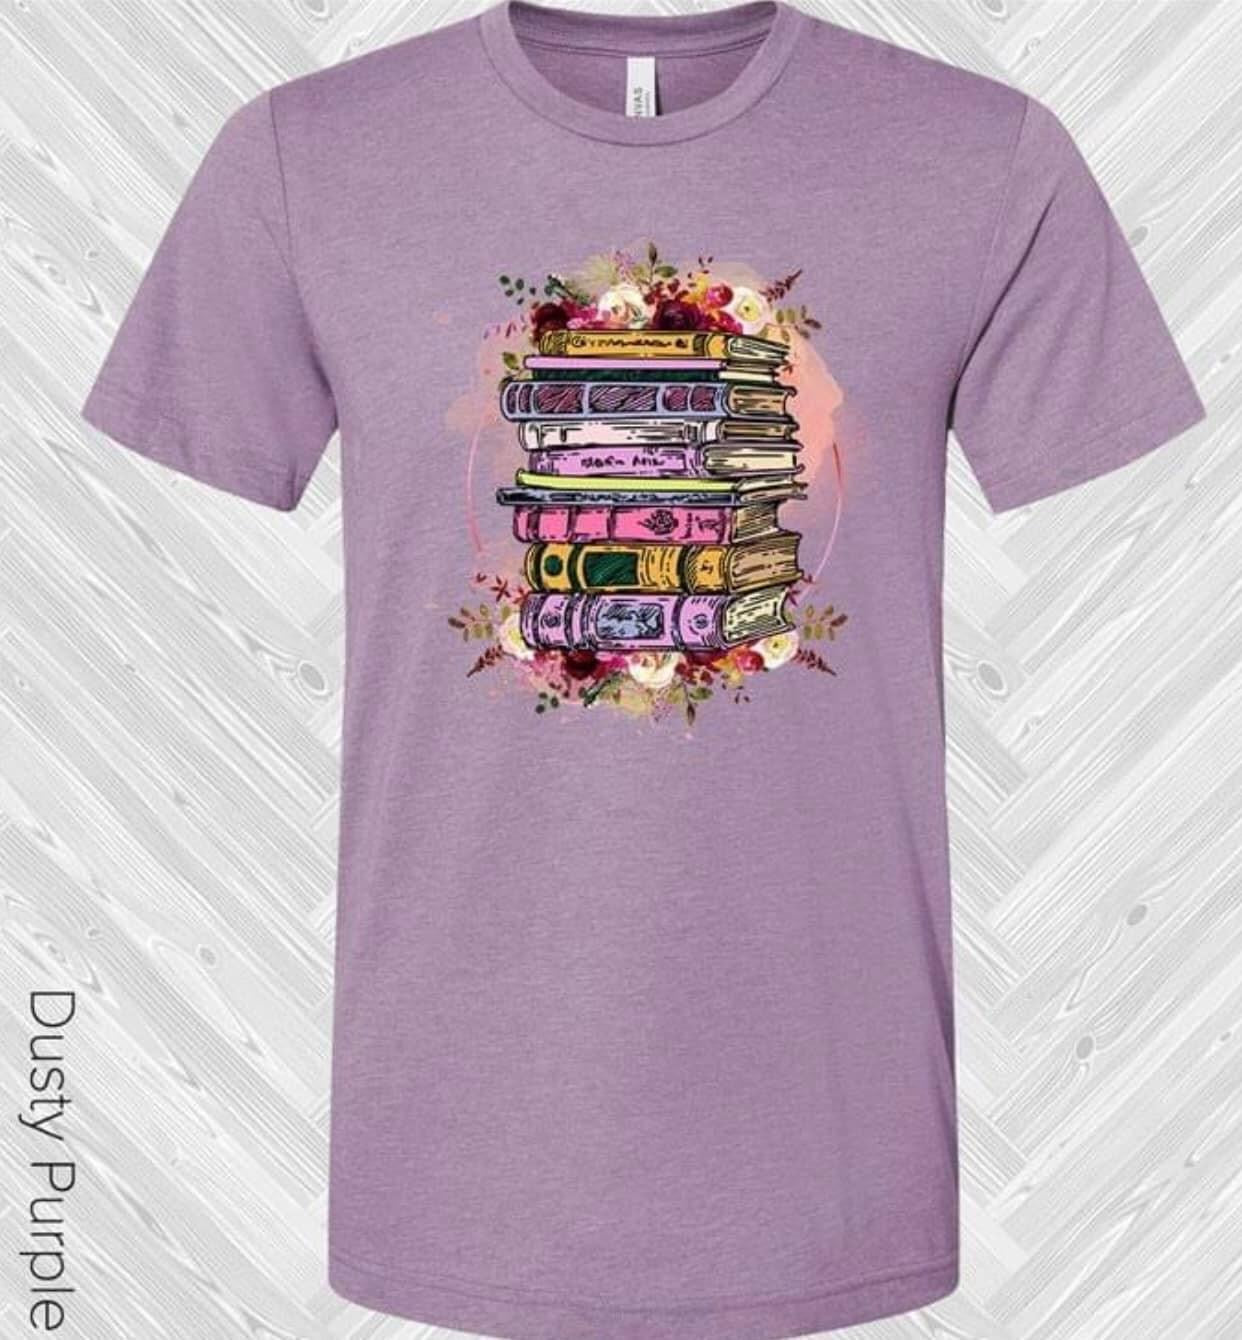 Floral Stack Of Books Tee